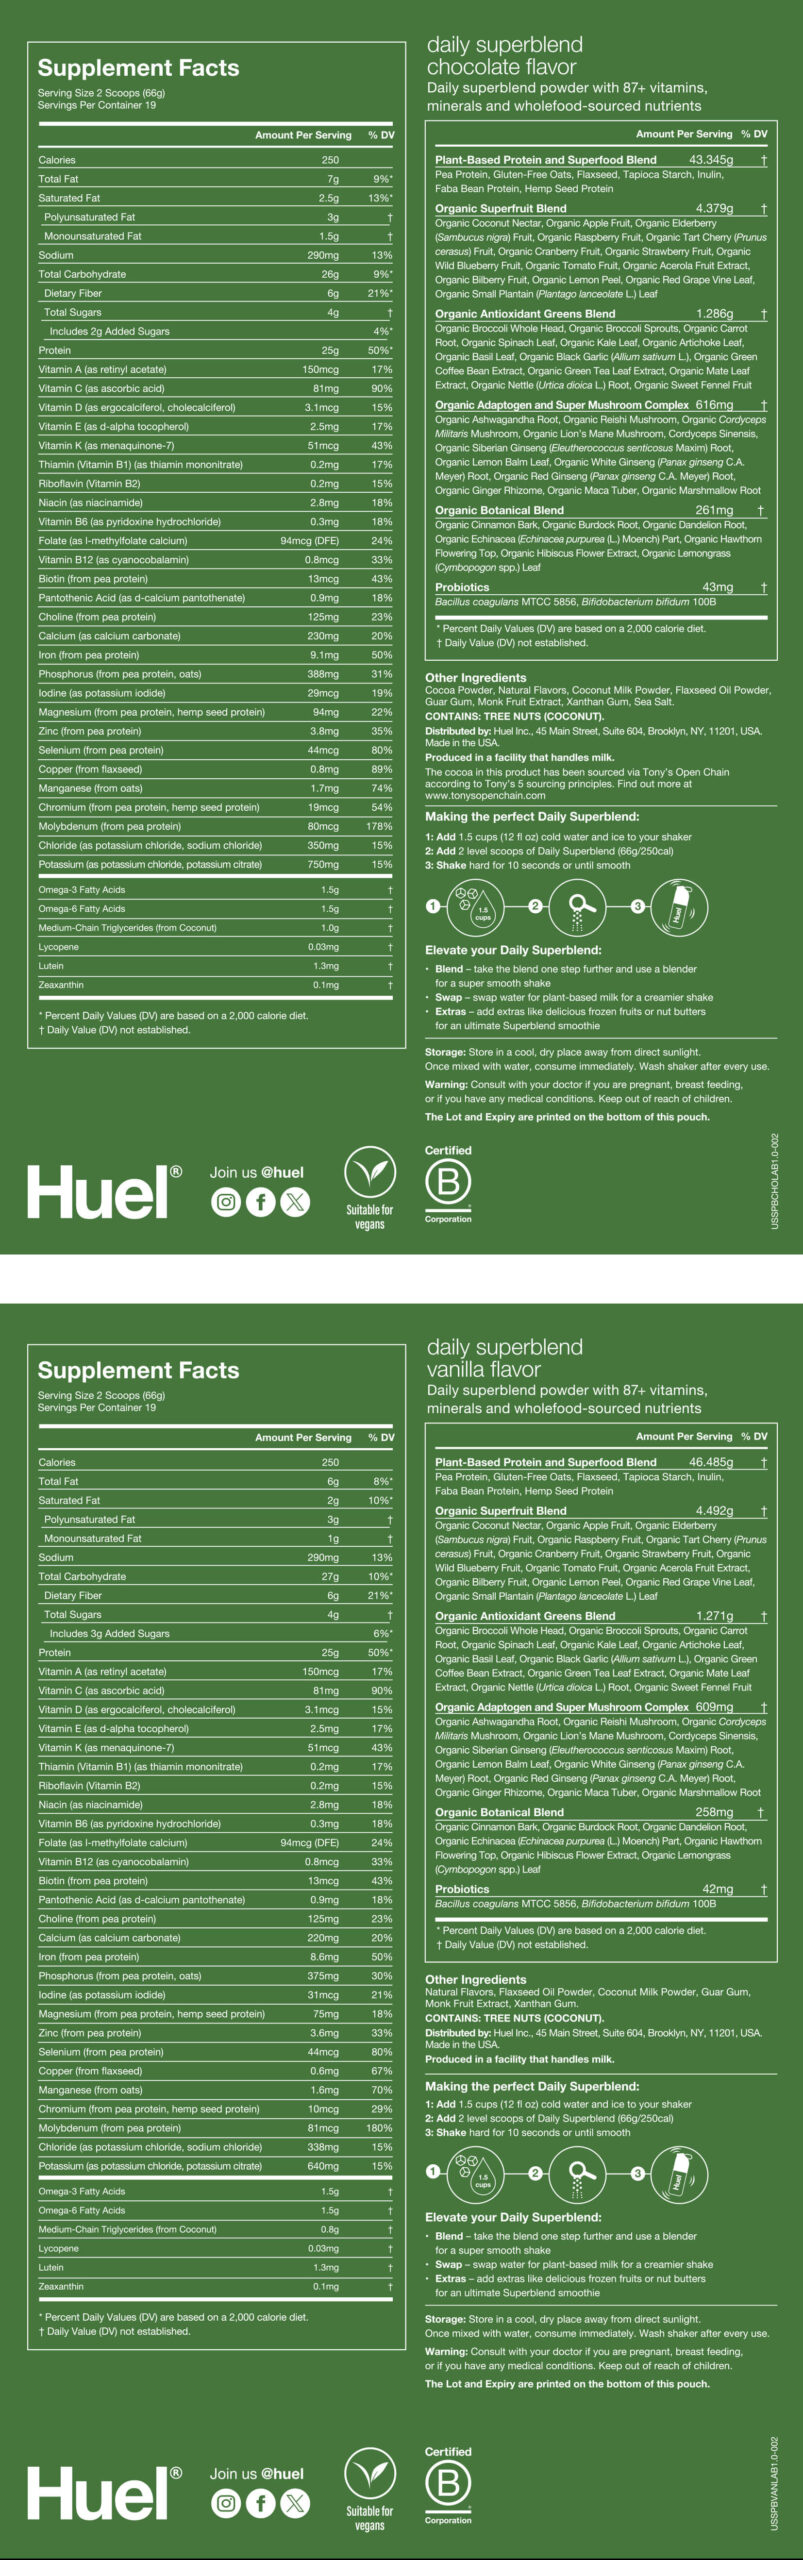 Huel Daily Superfood blend nutrition label